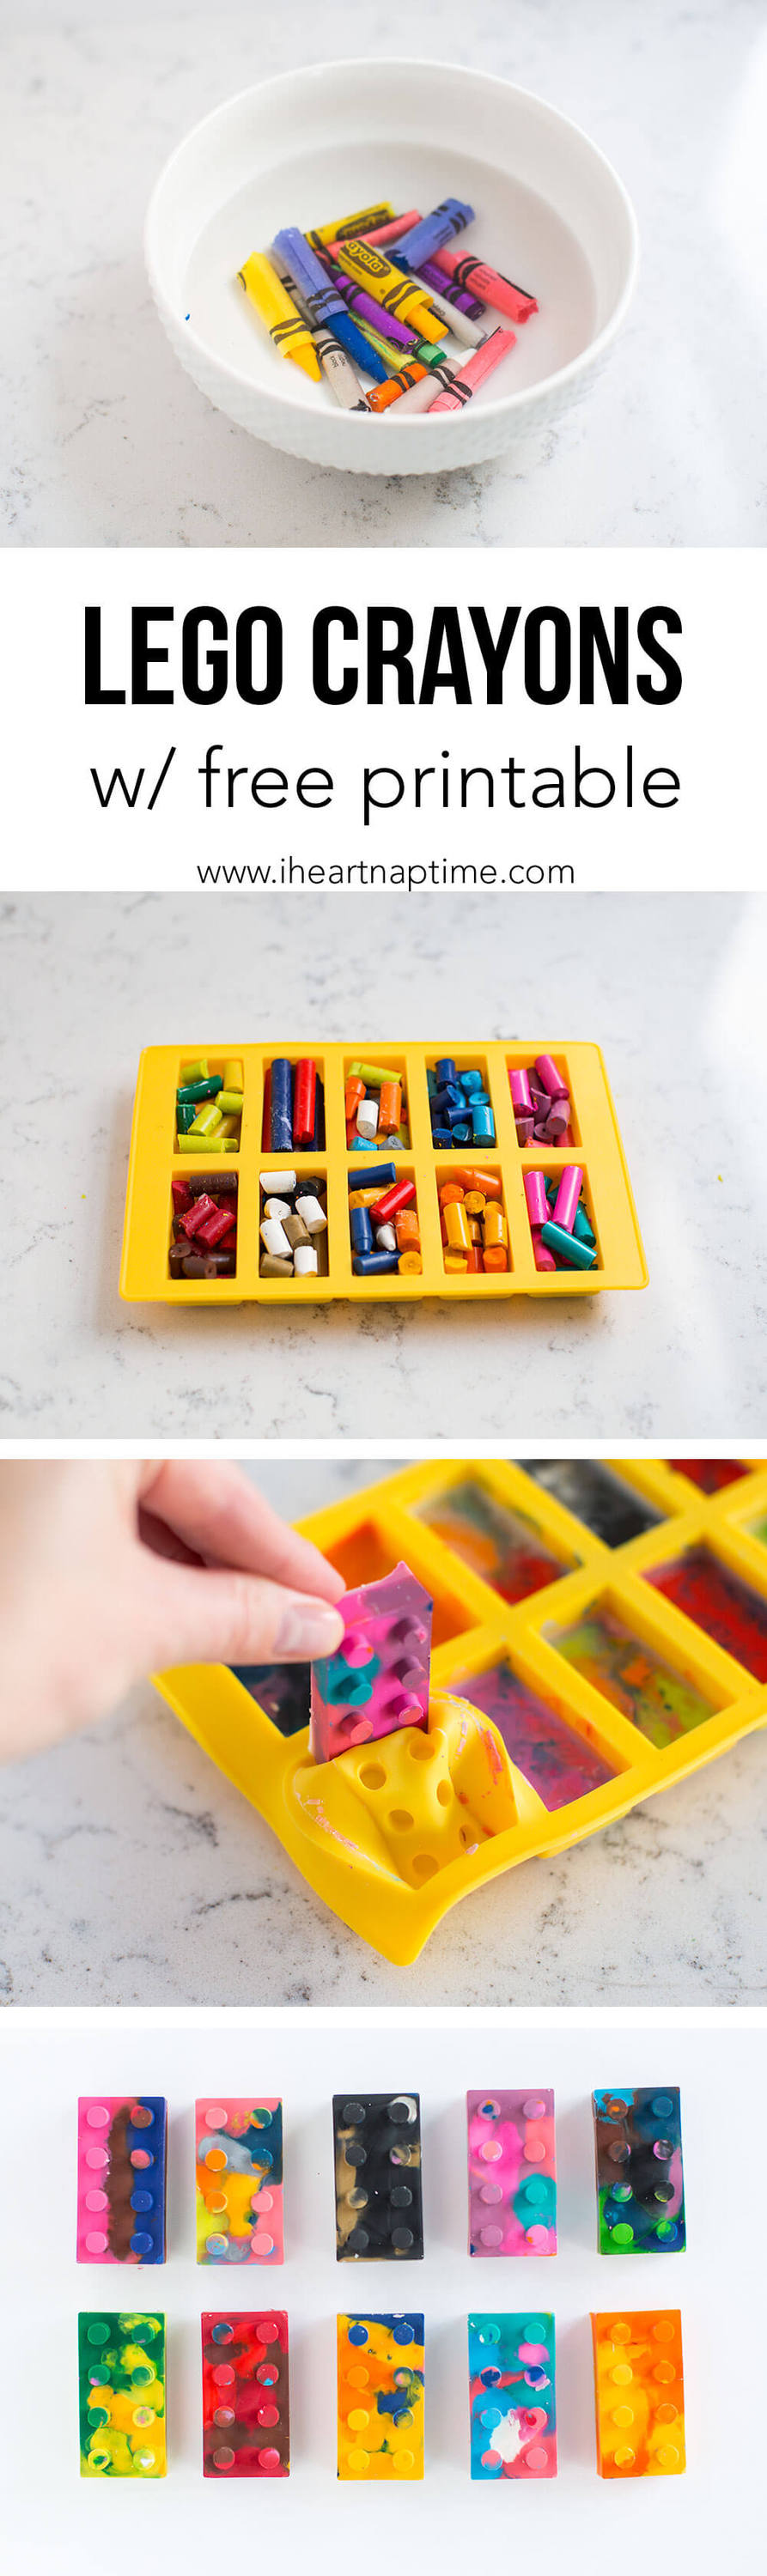 How to EASILY remove paper wrappers from crayons and bake them into different shaped mold ... this is so simple that it's sort of genius!